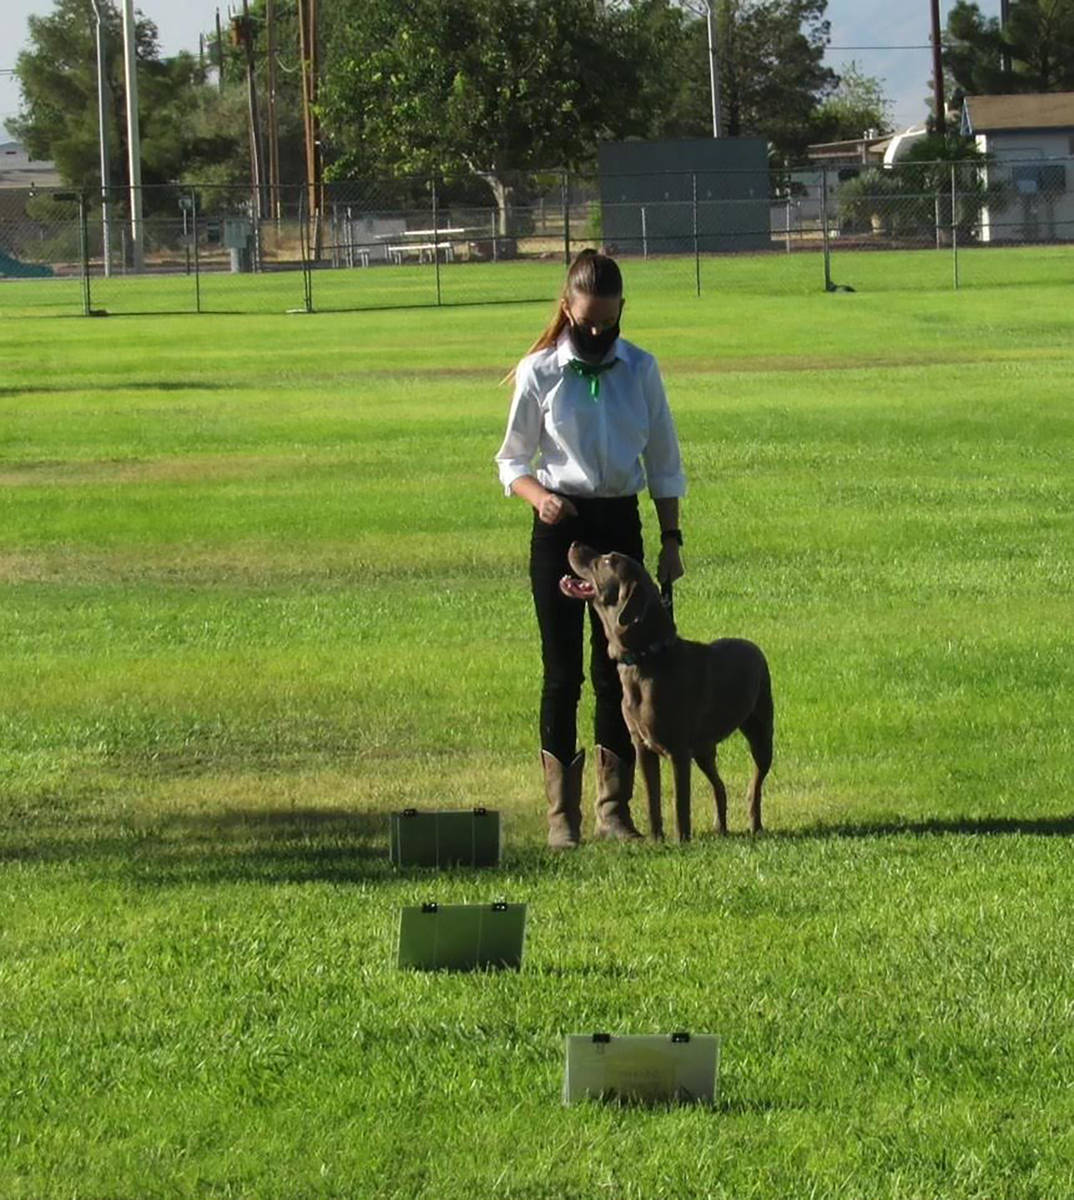 Stormy Ingersoll/Special to the Pahrump Valley Times A member of the 4-H Dog Den club is shown ...